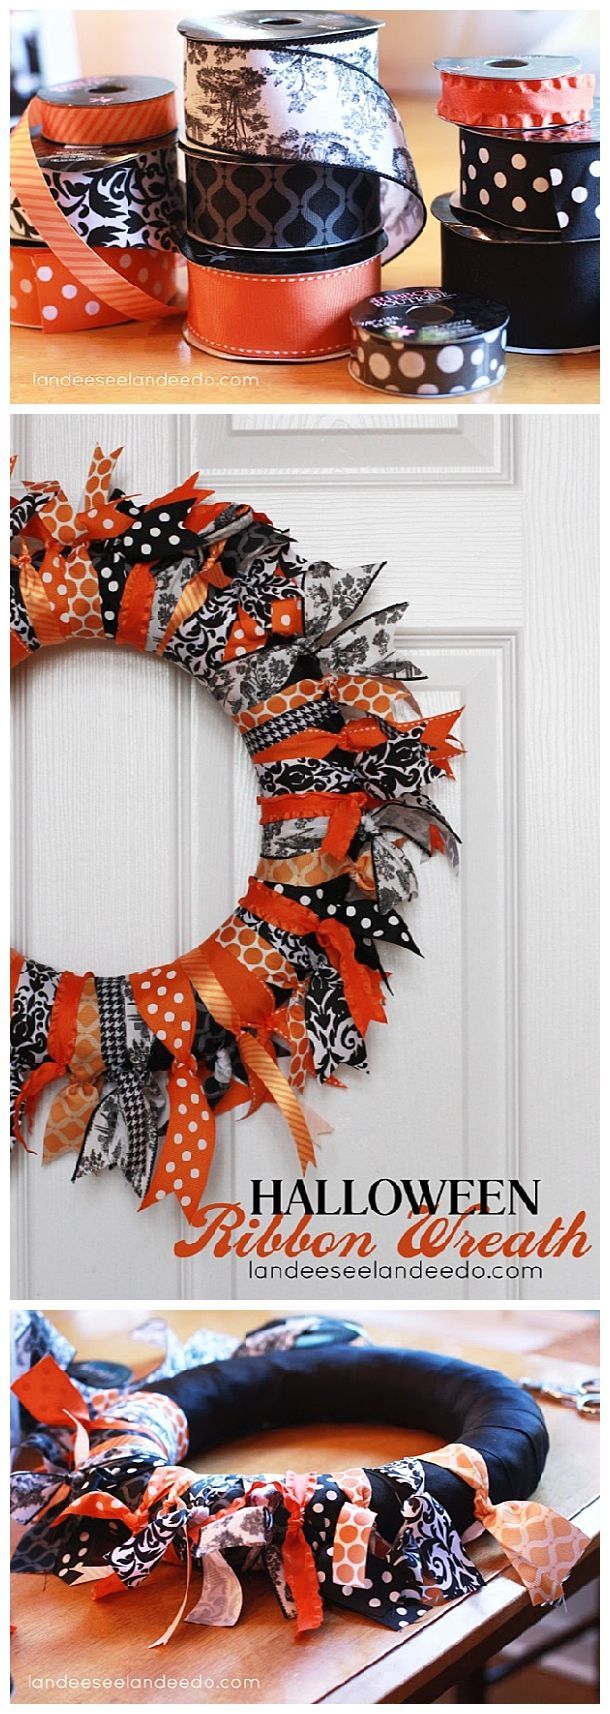 EASY and FUN DIY Halloween Ribbon Wreath Craft Project – Easy Step by Step Holiday Home Decoration Tutorial